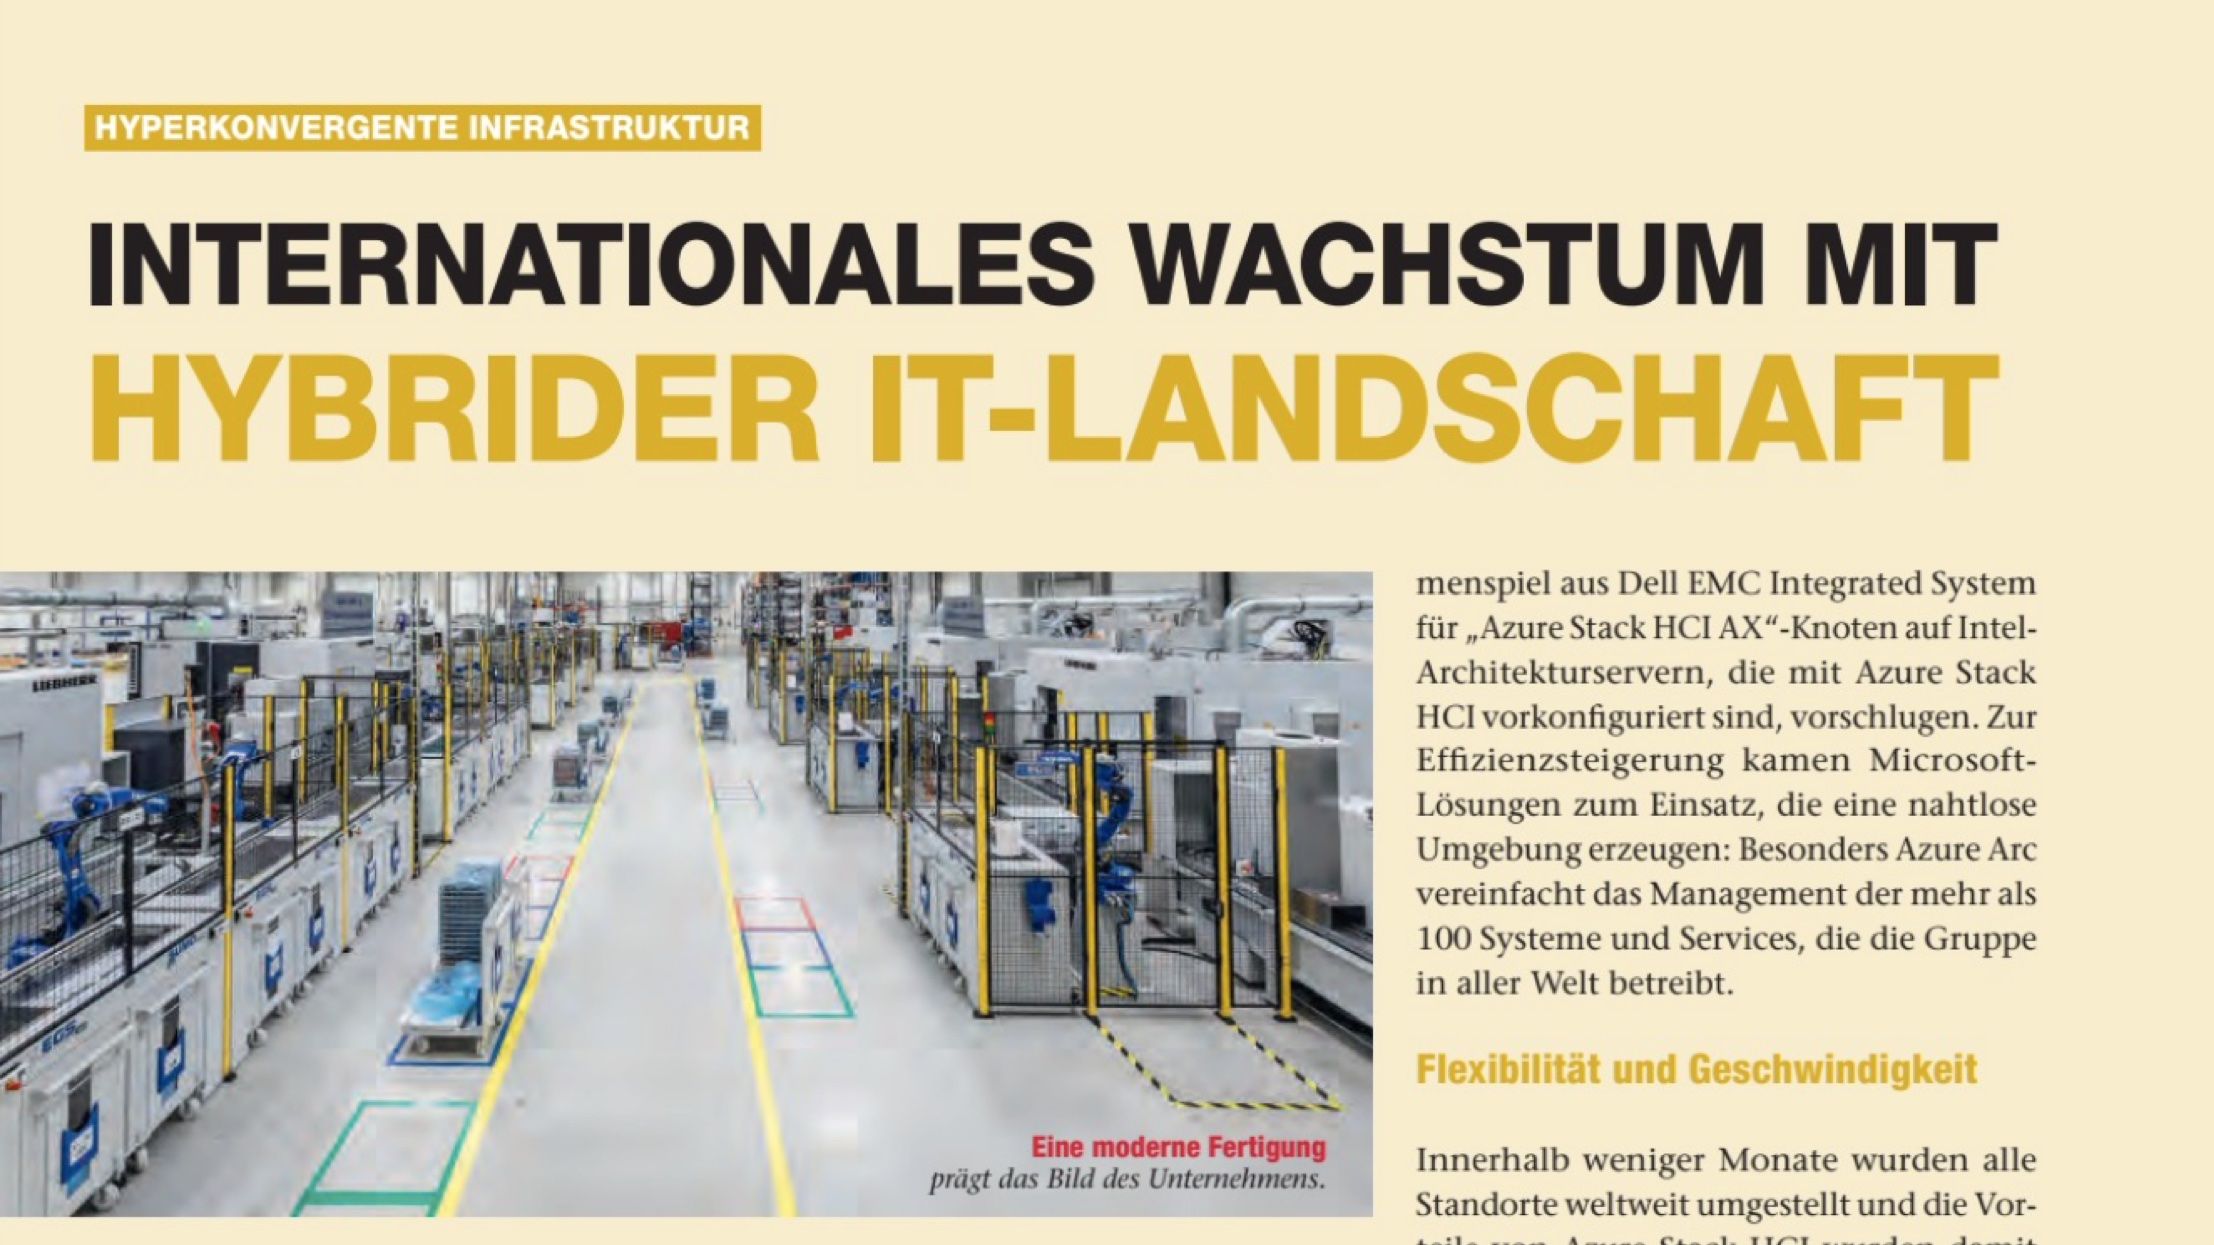 Article "International growth with hybrid IT landscape" in  IT-Mittelstand